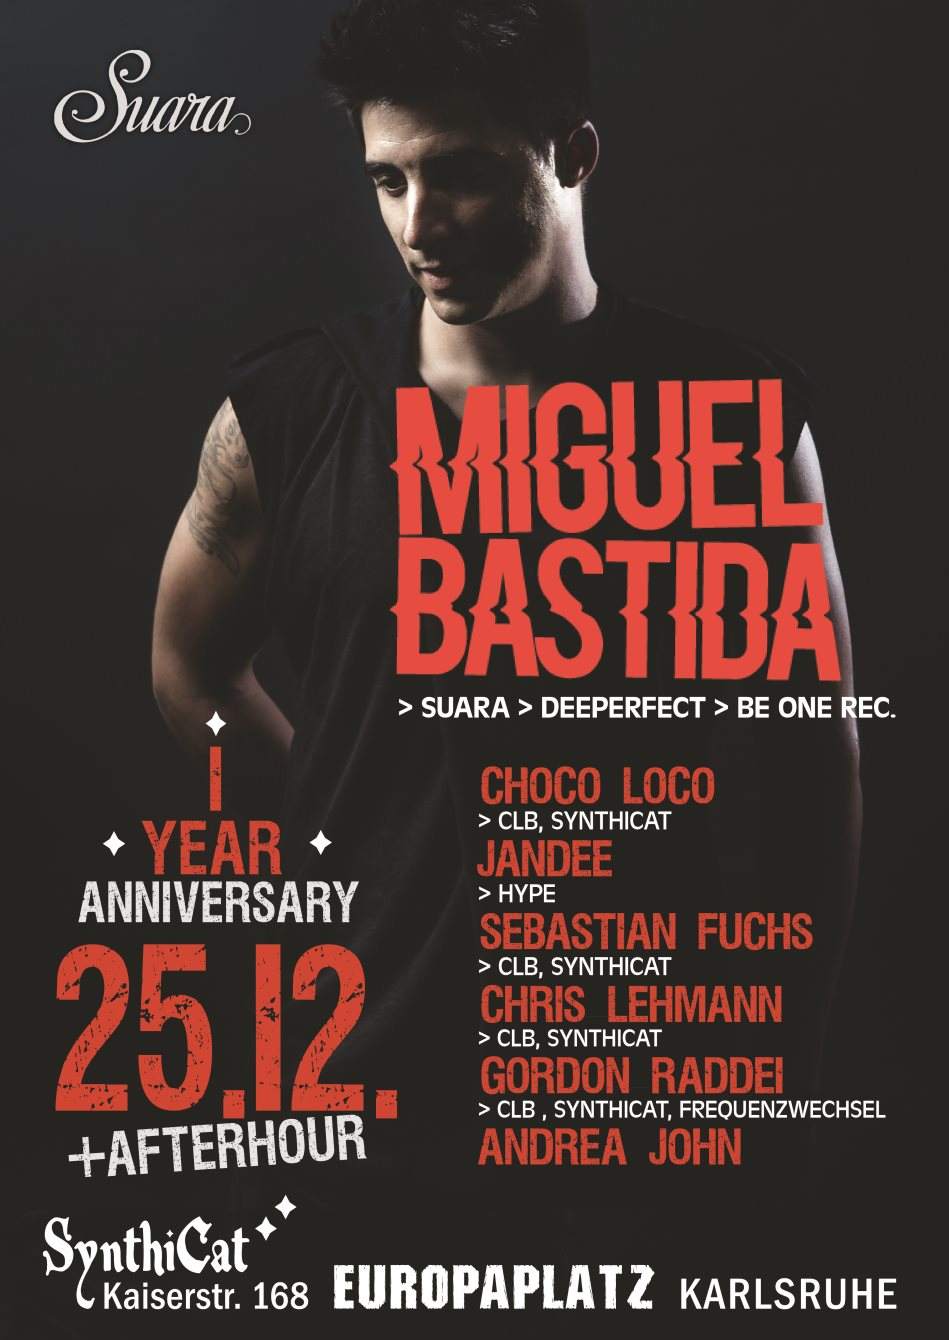 1 Years Anniversary of Synthicat with Miguel Bastida (Suara, Deeperfect, Be One Records) - Página trasera